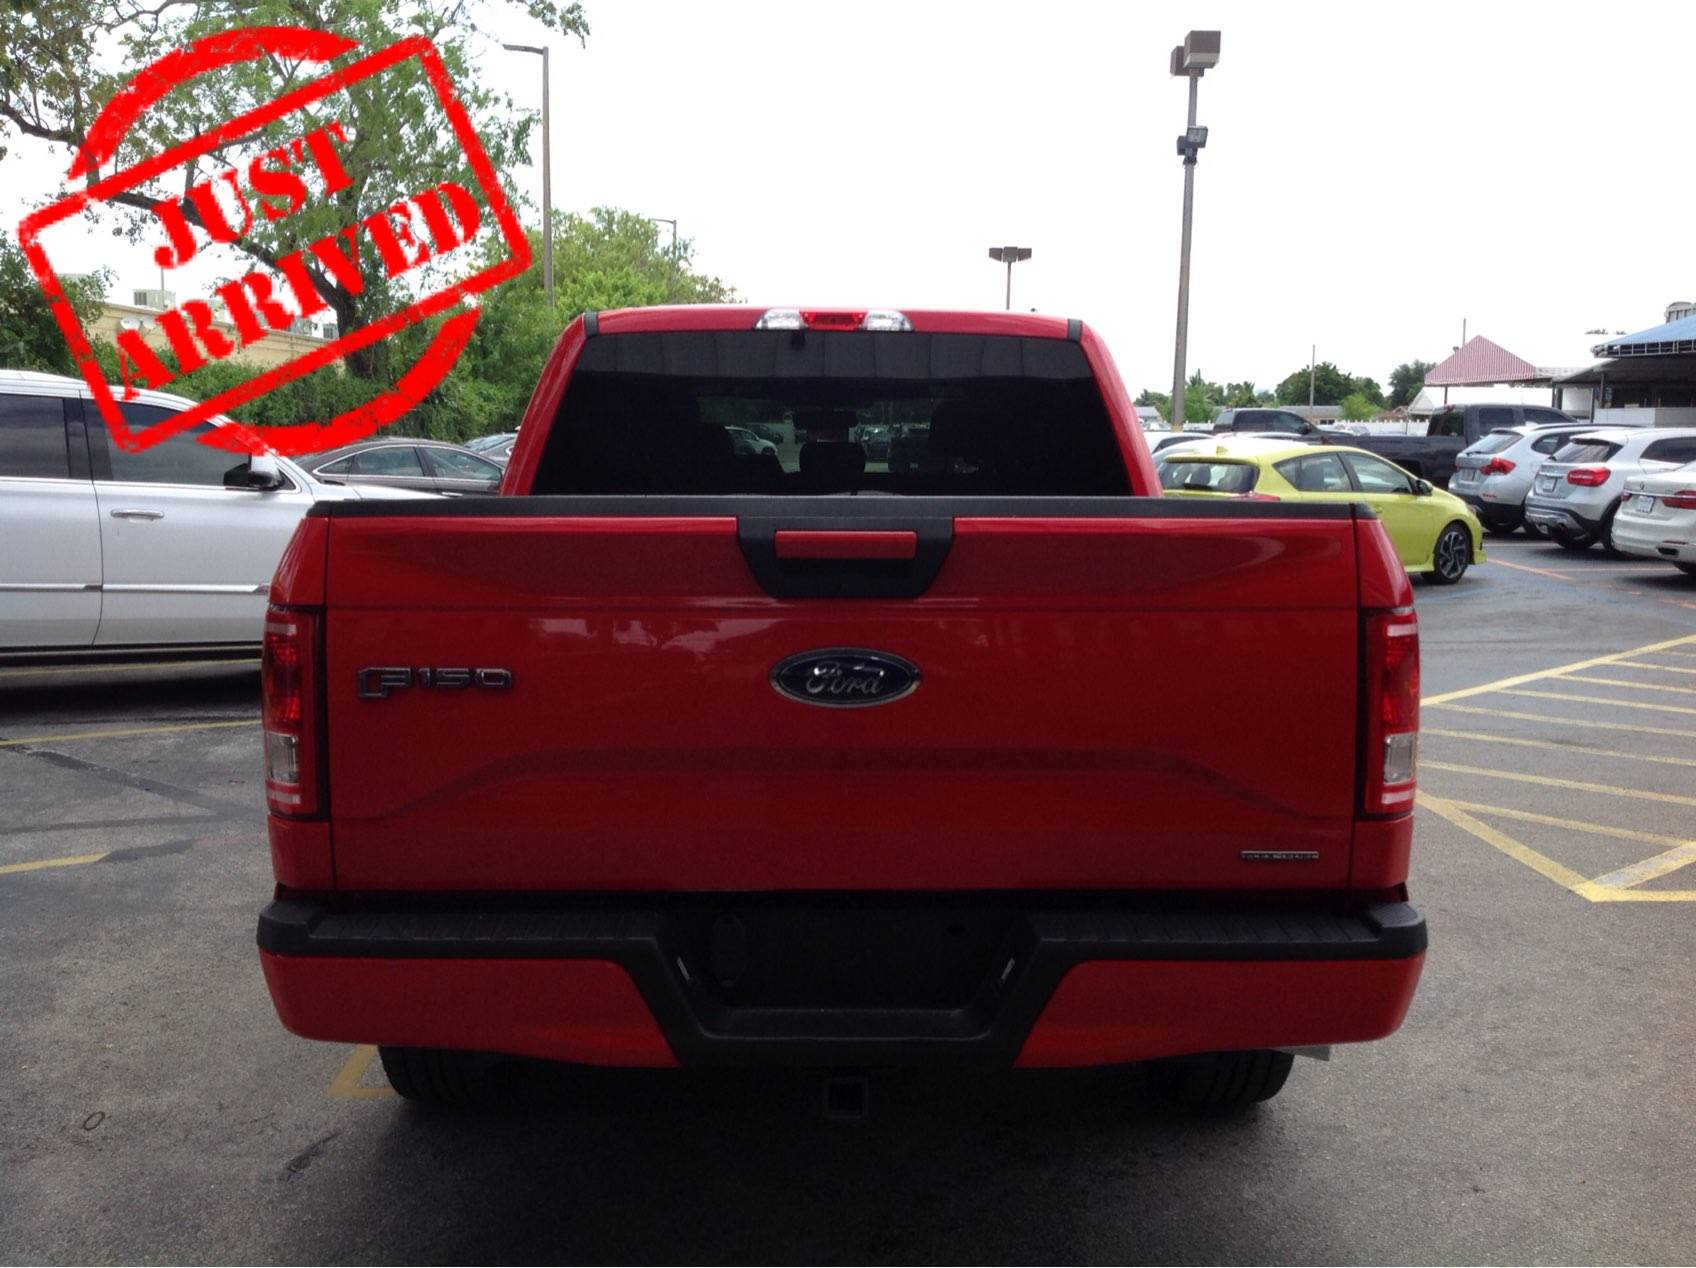 Florida Fine Cars - Used FORD F 150 2015 MIAMI XLT SPORT APPEARANCE